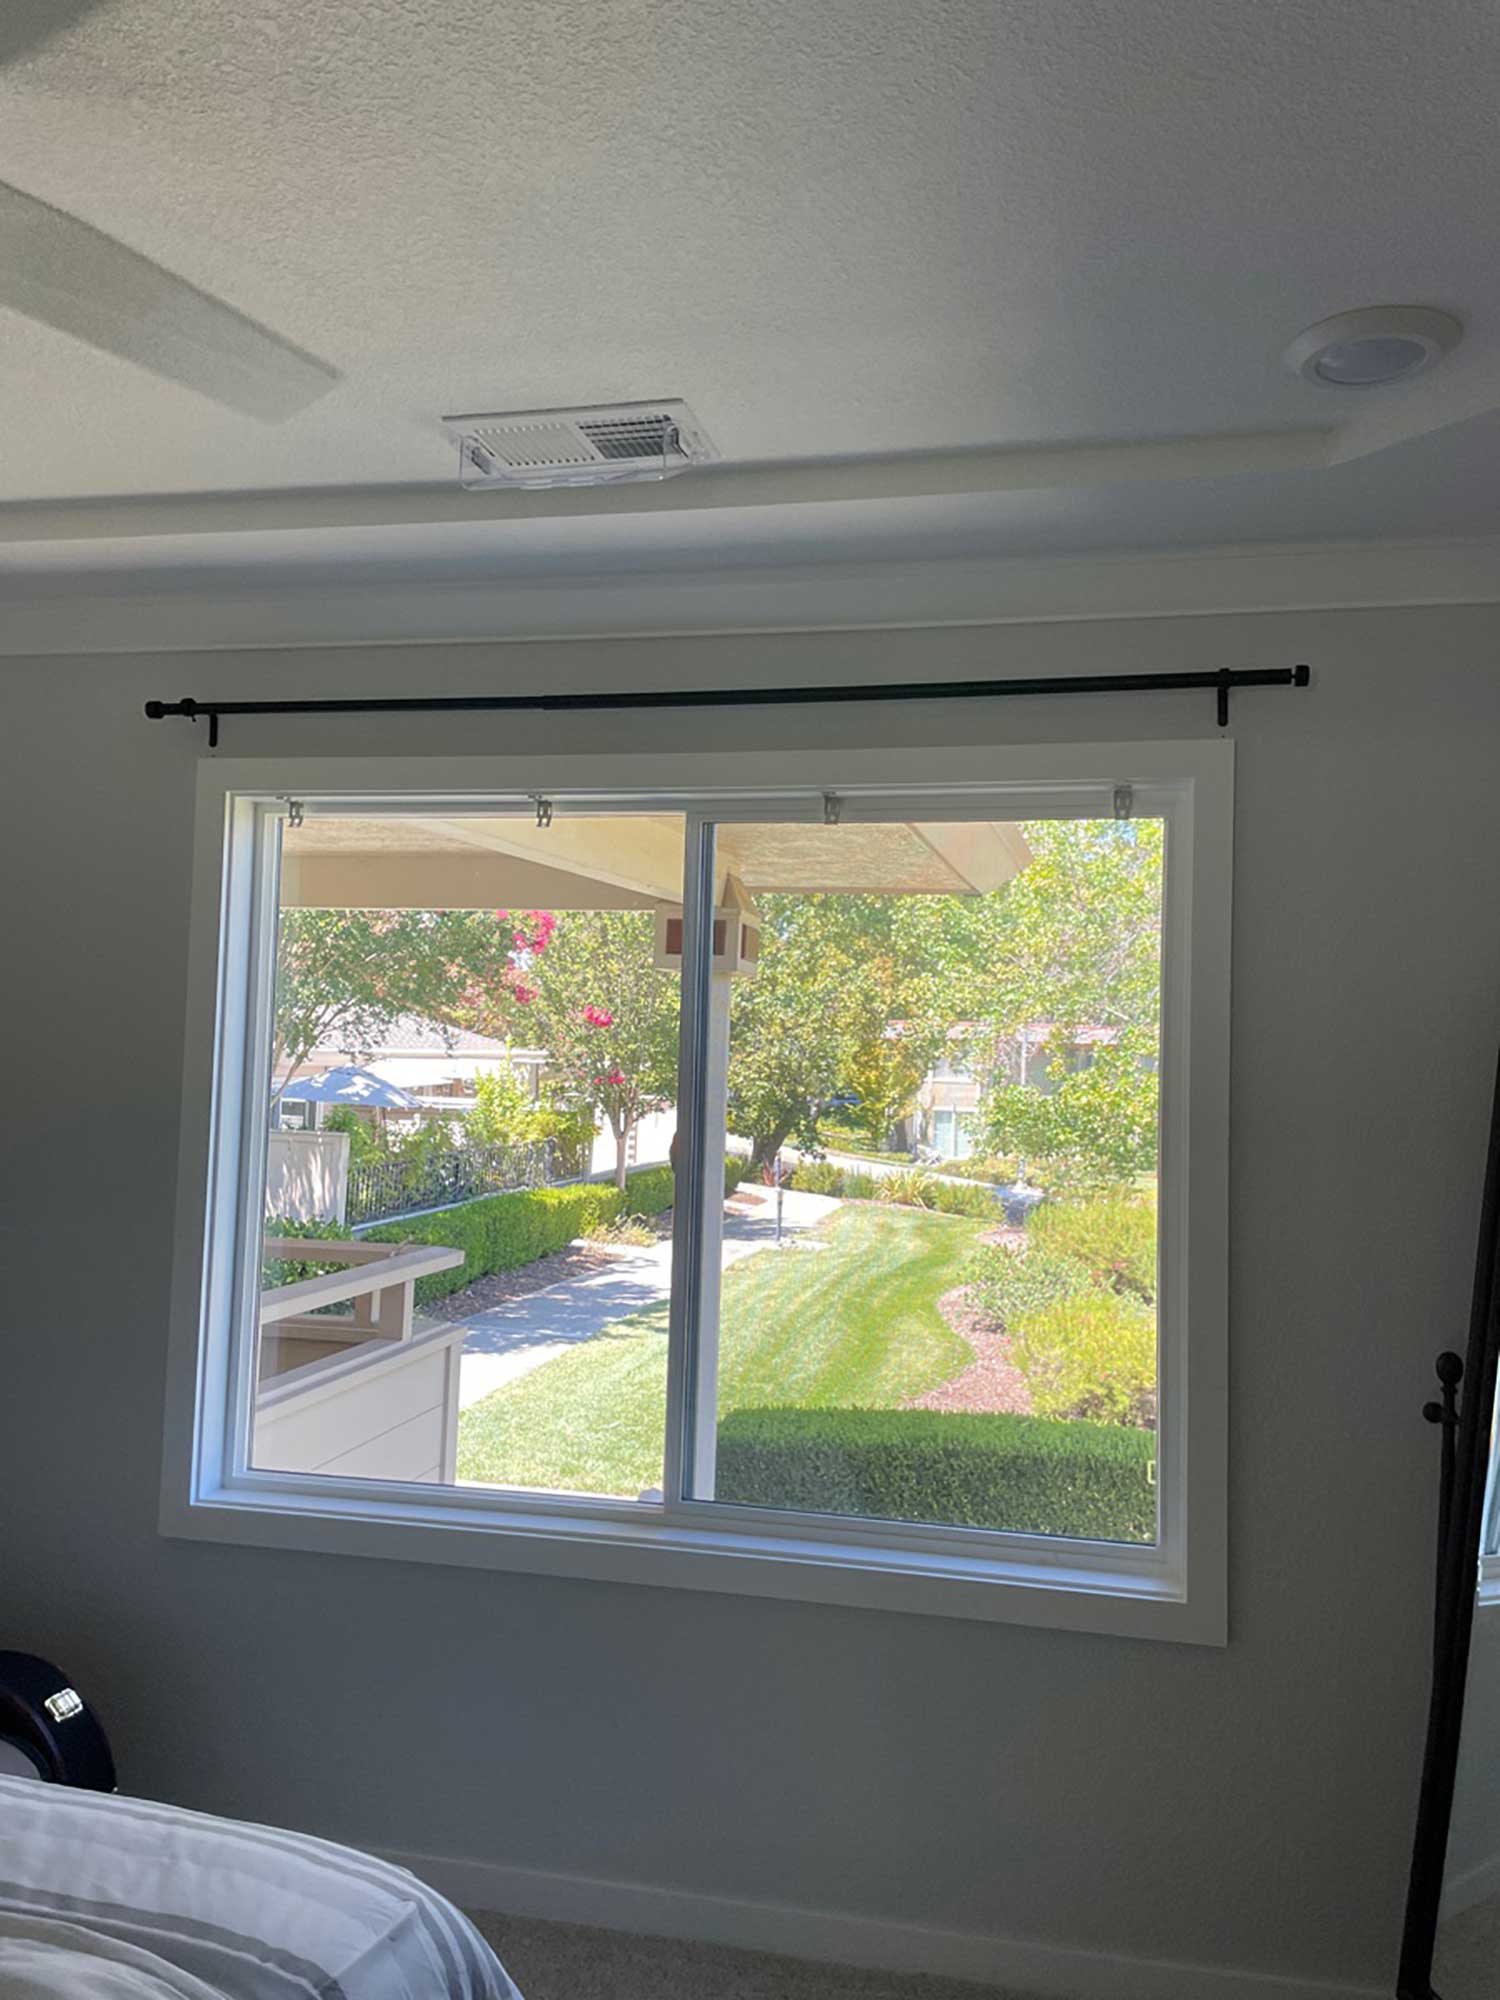 ClimatePro installed window film and tint all over the San Francisco Bay Area in August 2022.